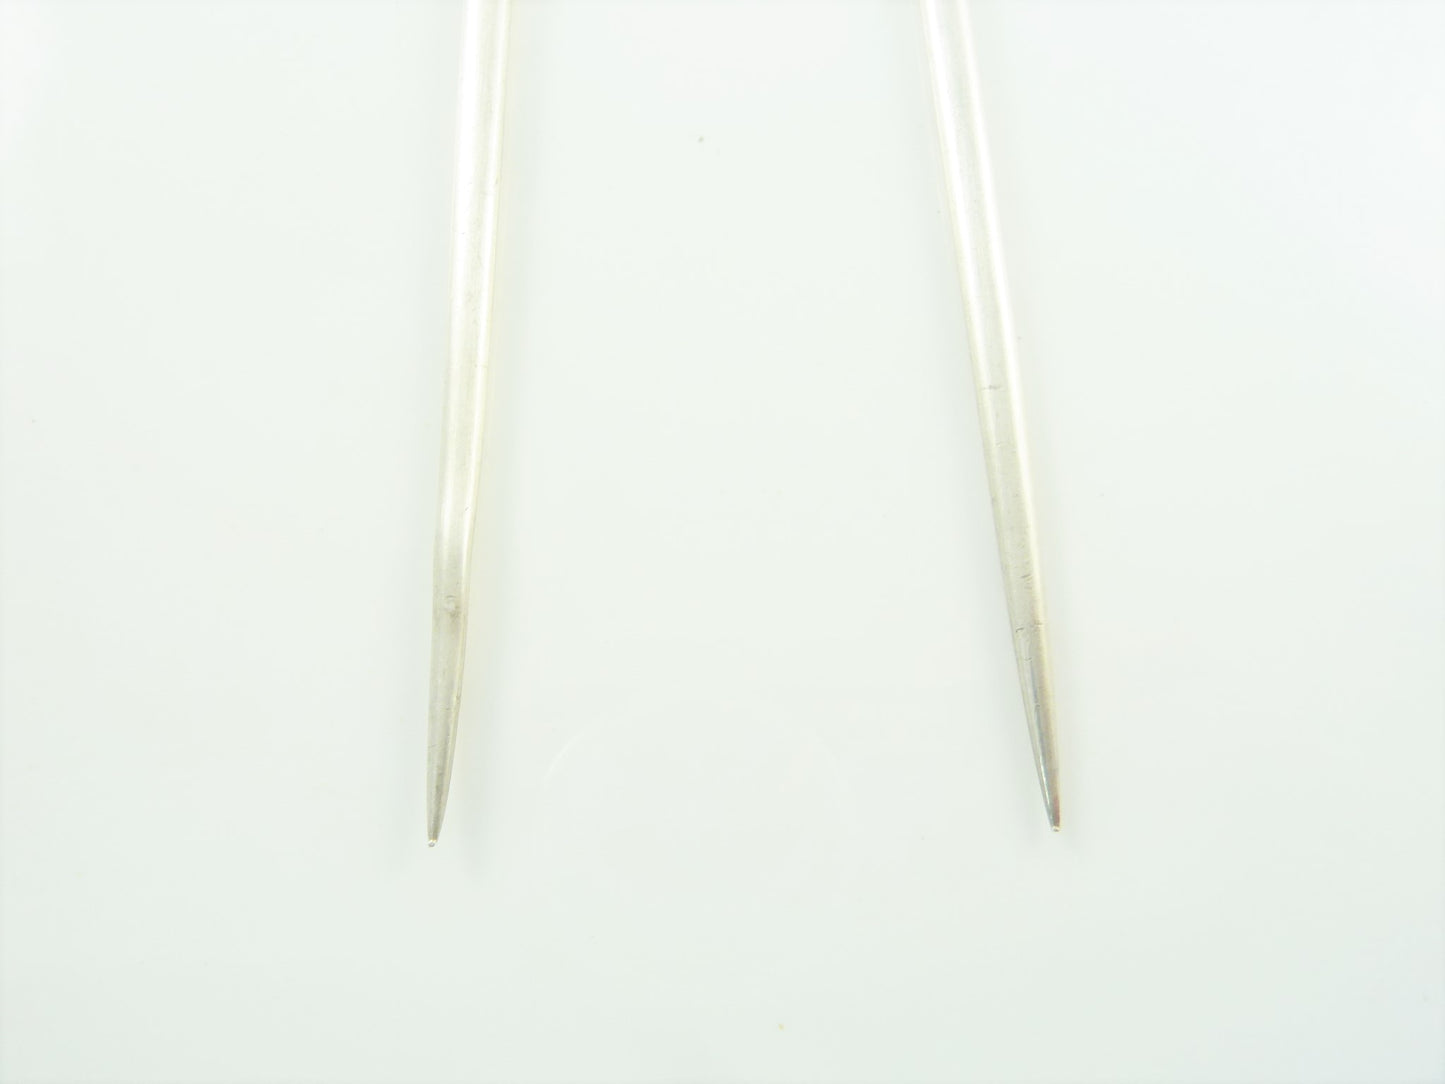 Tiffany & Co Silver Plate Skewers, Garland & Bow - 43 Chesapeake Court Antiques